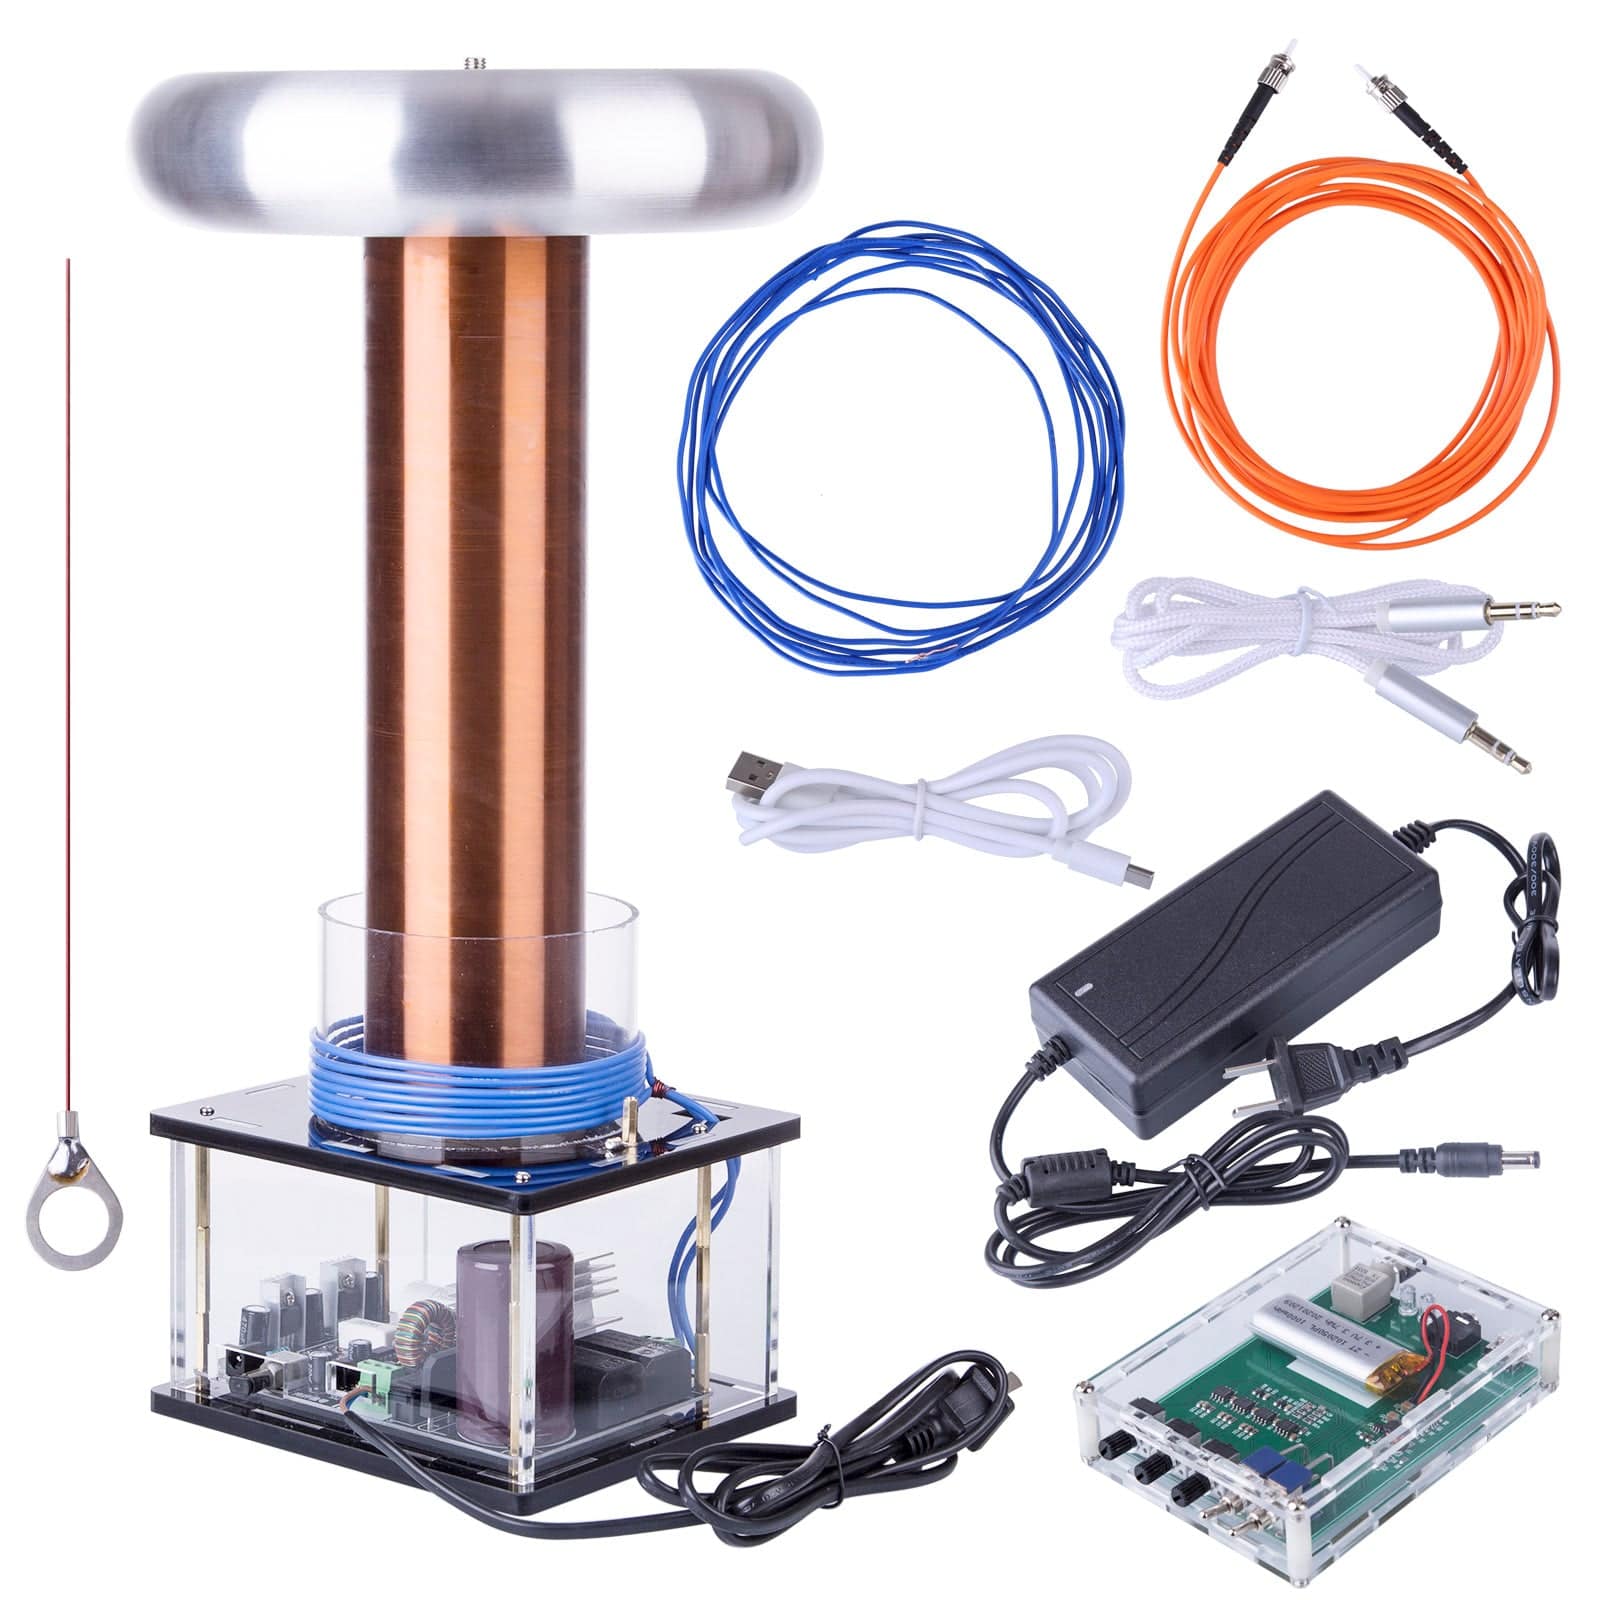 Stark 40cm Height High Voltage Inductive Arc Musical Tesla Coil Experimental Physics Toy - stirlingkit